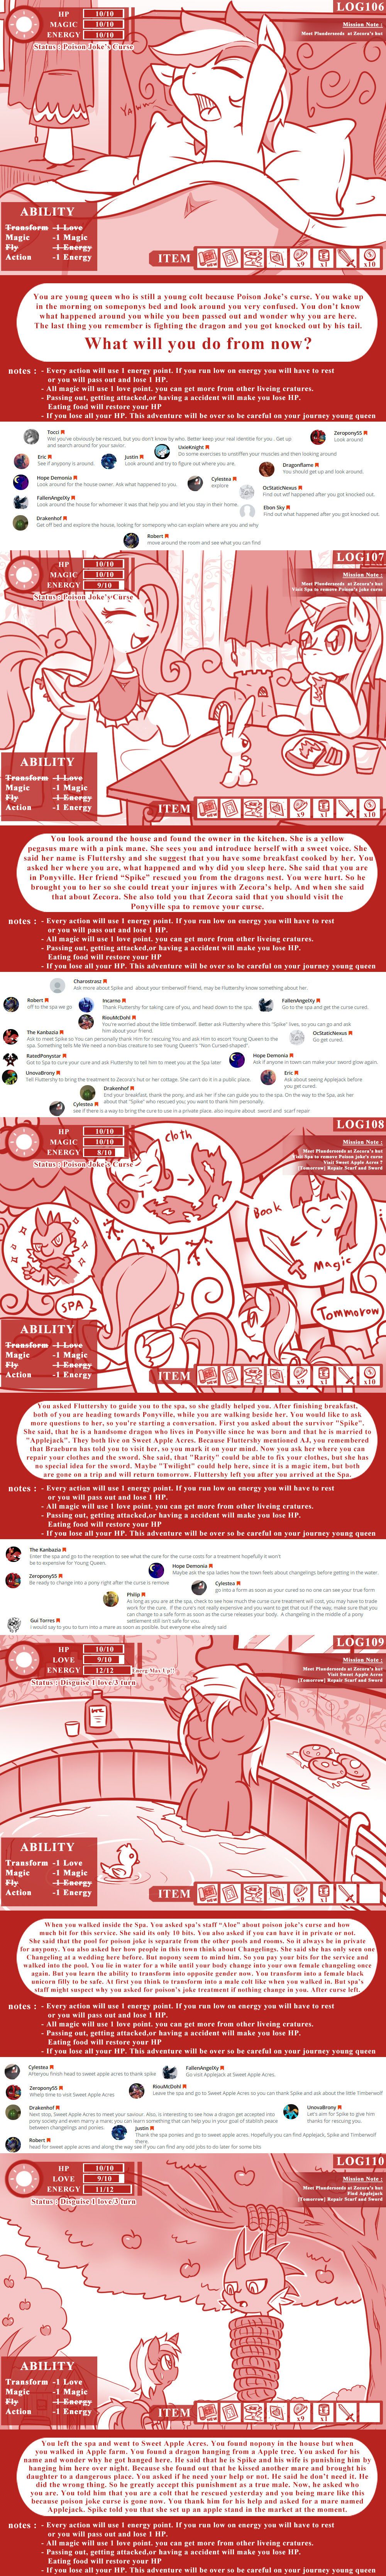 [Vavacung] The Adventure Logs Of Young Queen (My Little Pony: Friendship is Magic) [English] [Ongoing] 23